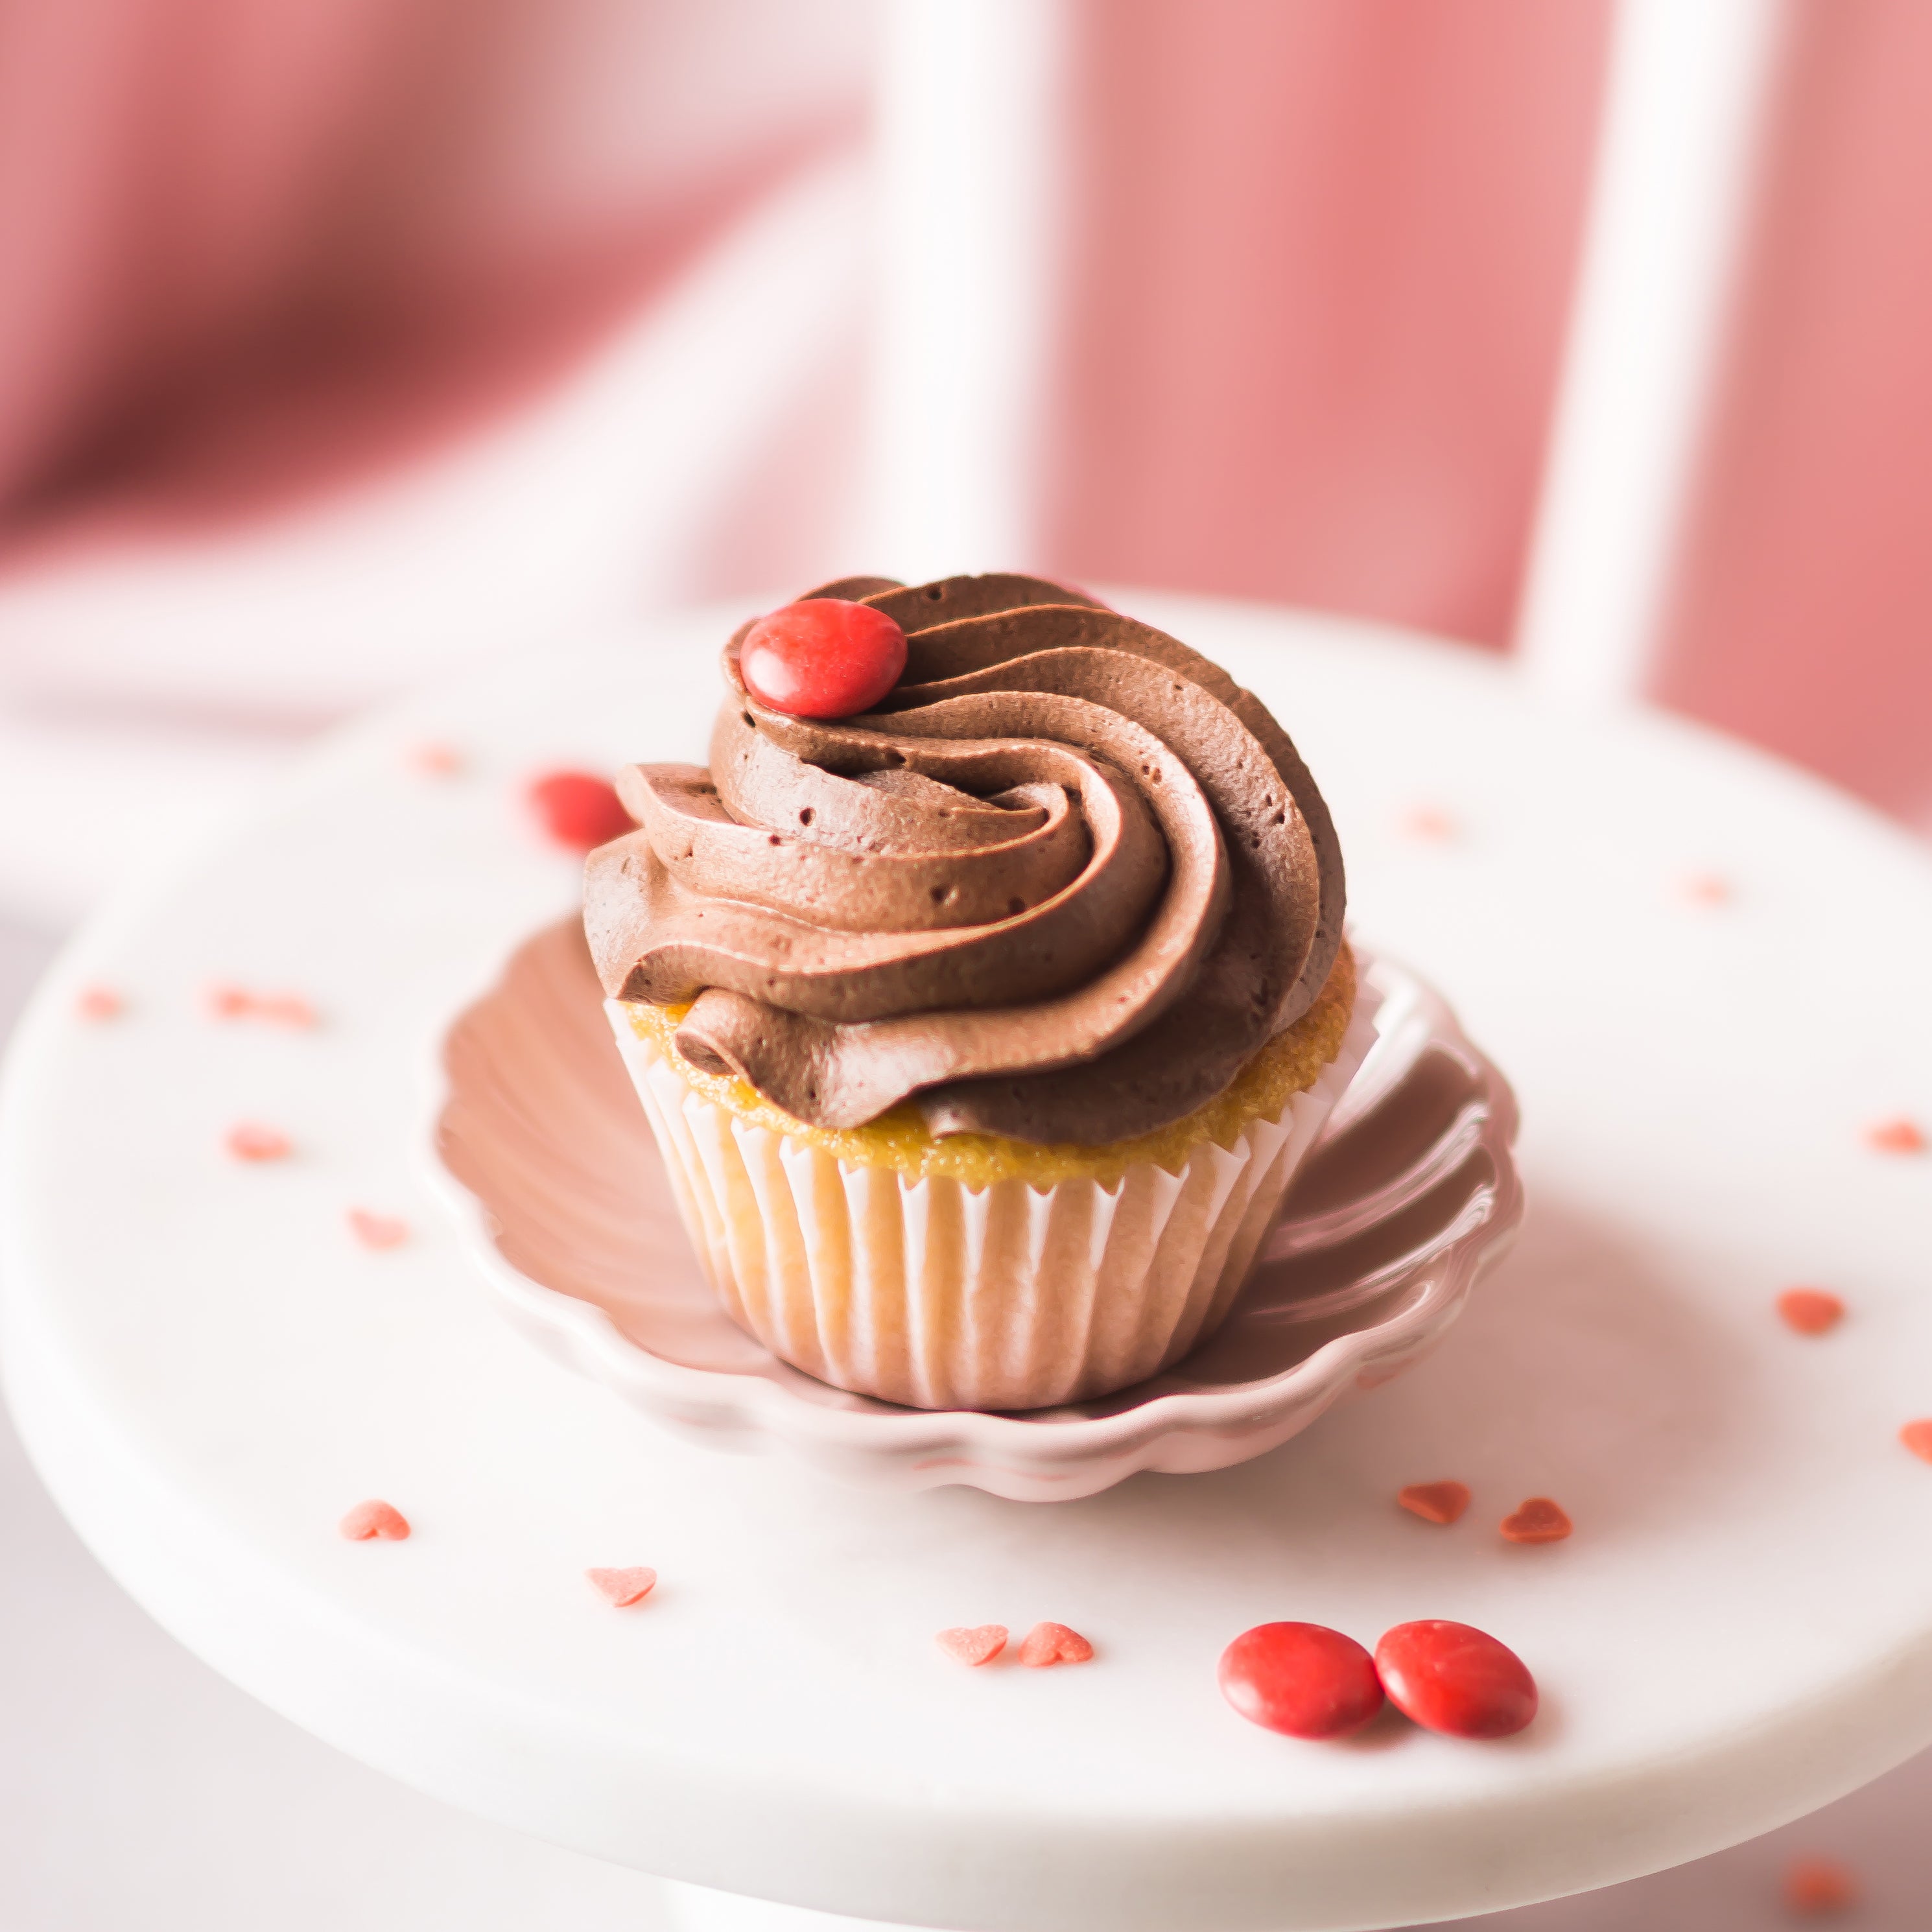 Satisfy your sweet tooth with a classic vanilla chocolate cupcake, with its rich and velvety texture and a swirl of creamy frosting. Pair it perfectly with a crisp and refreshing Brut Cava, with its subtle fruit notes that complement the cupcake&